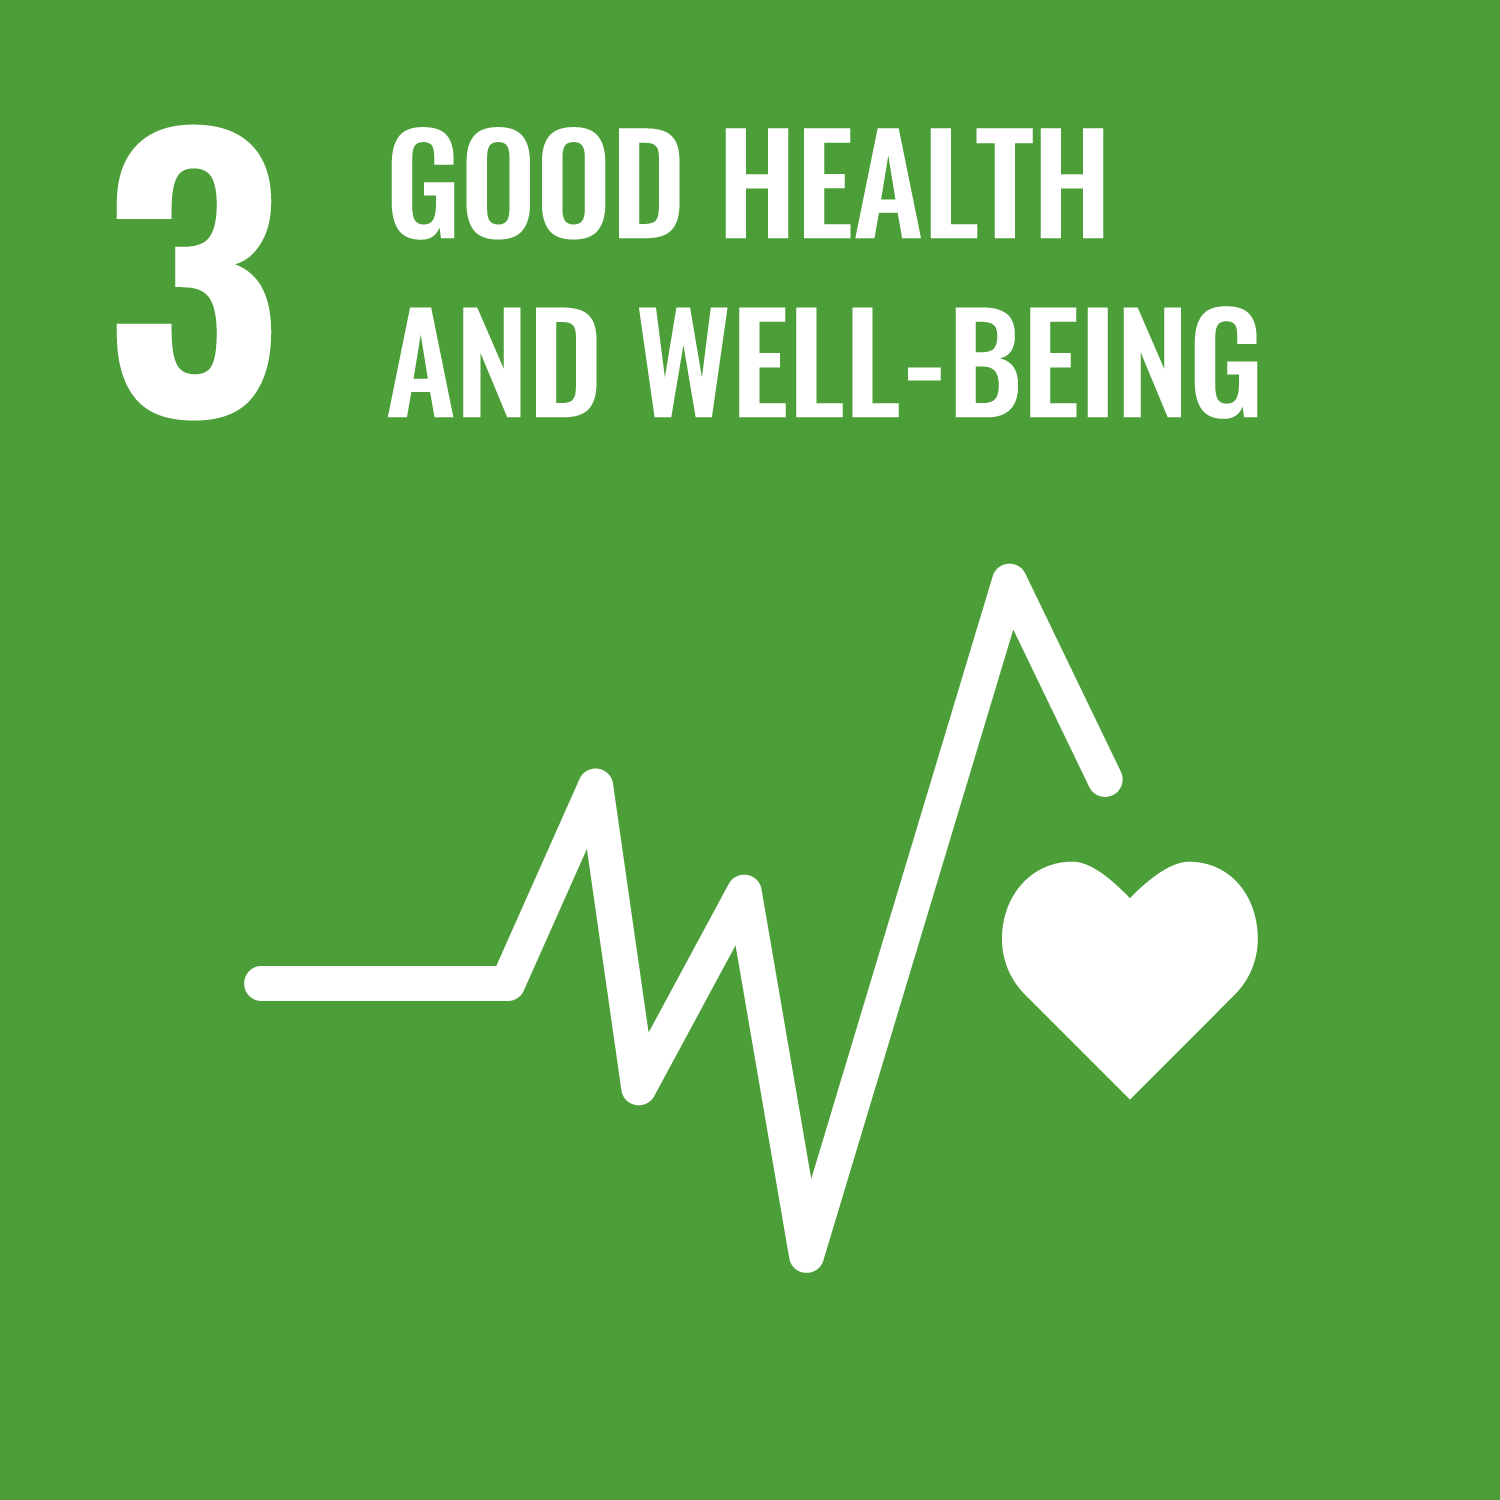 good-health-and-well-being-sustainability-goal